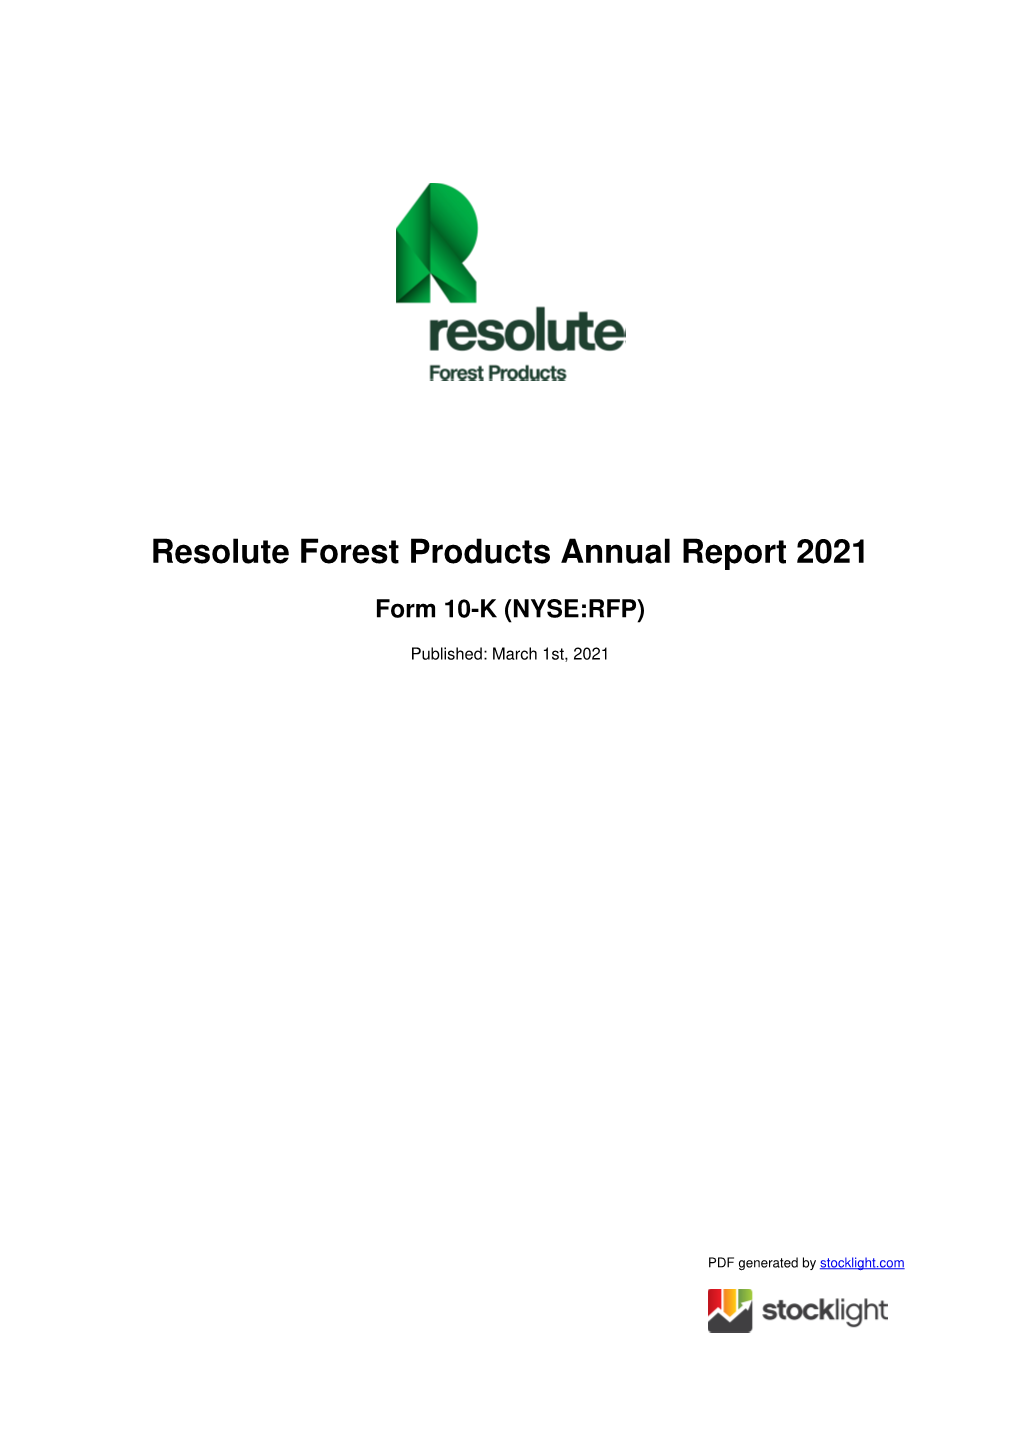 Resolute Forest Products Annual Report 2021